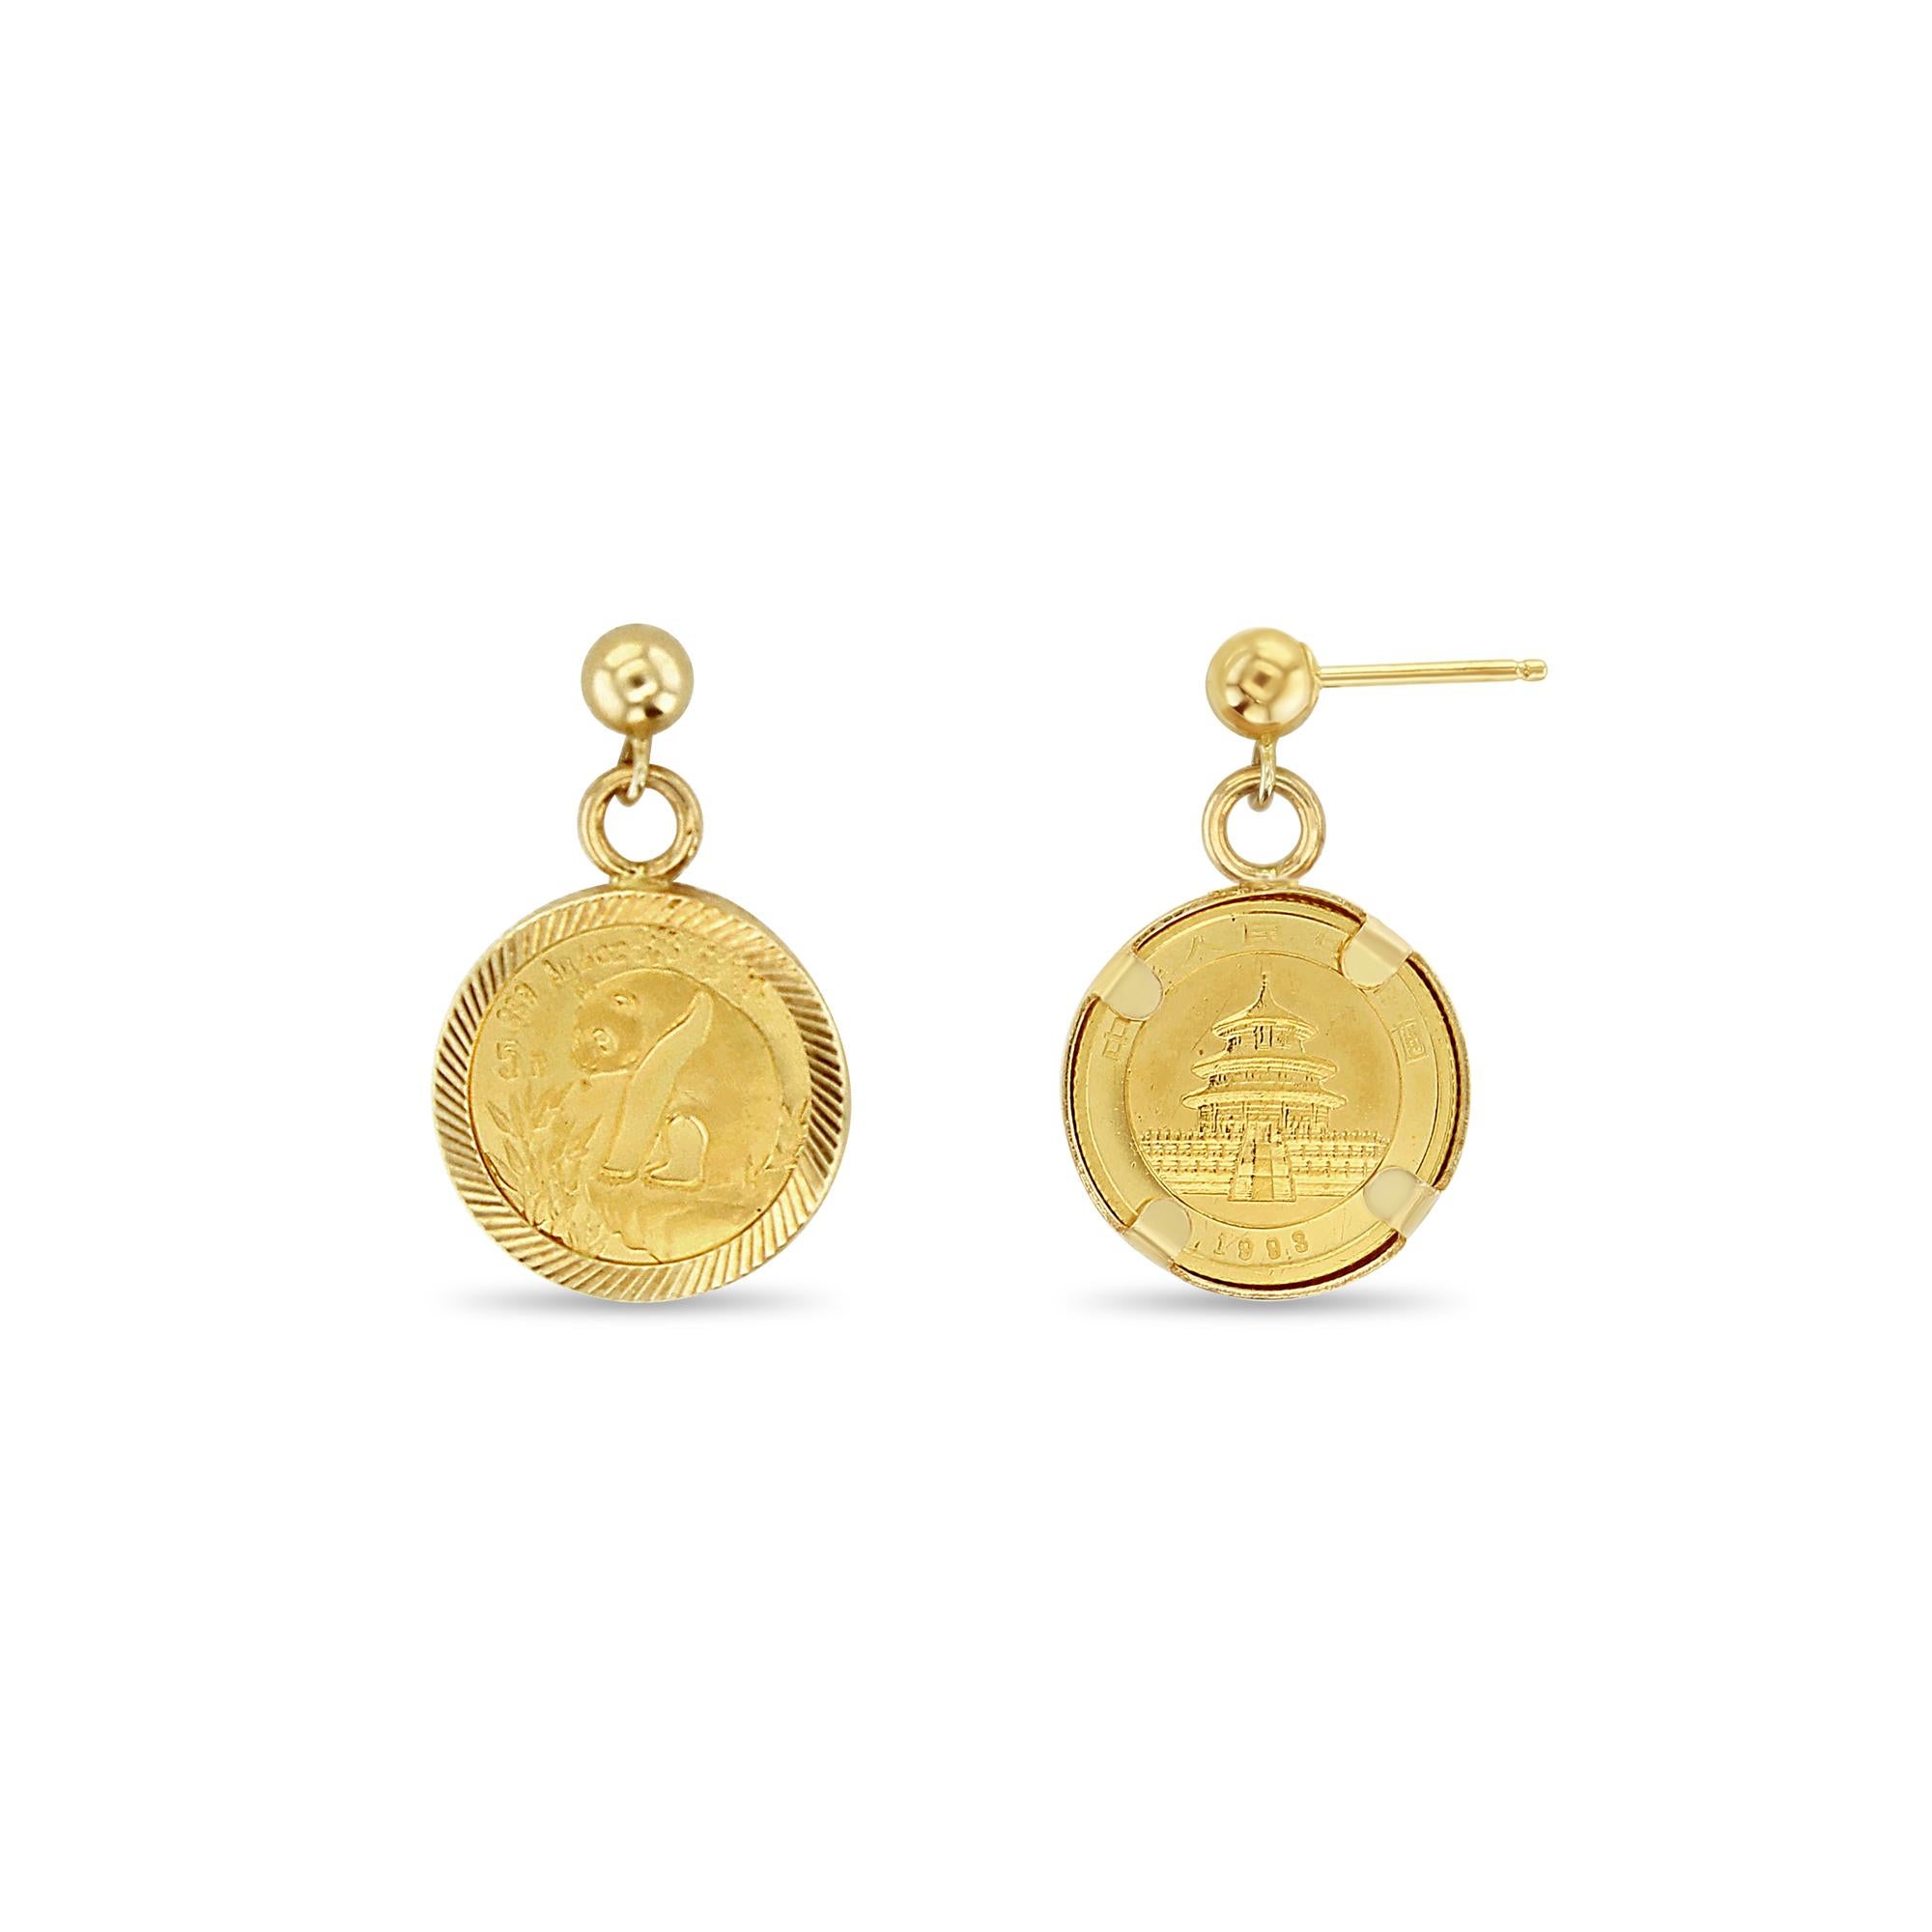 1/20OZ Panda Gold Coin Drop Earrings with Diamond Cut Bezel - 14k Yellow Gold In New Condition For Sale In Sugar Land, TX